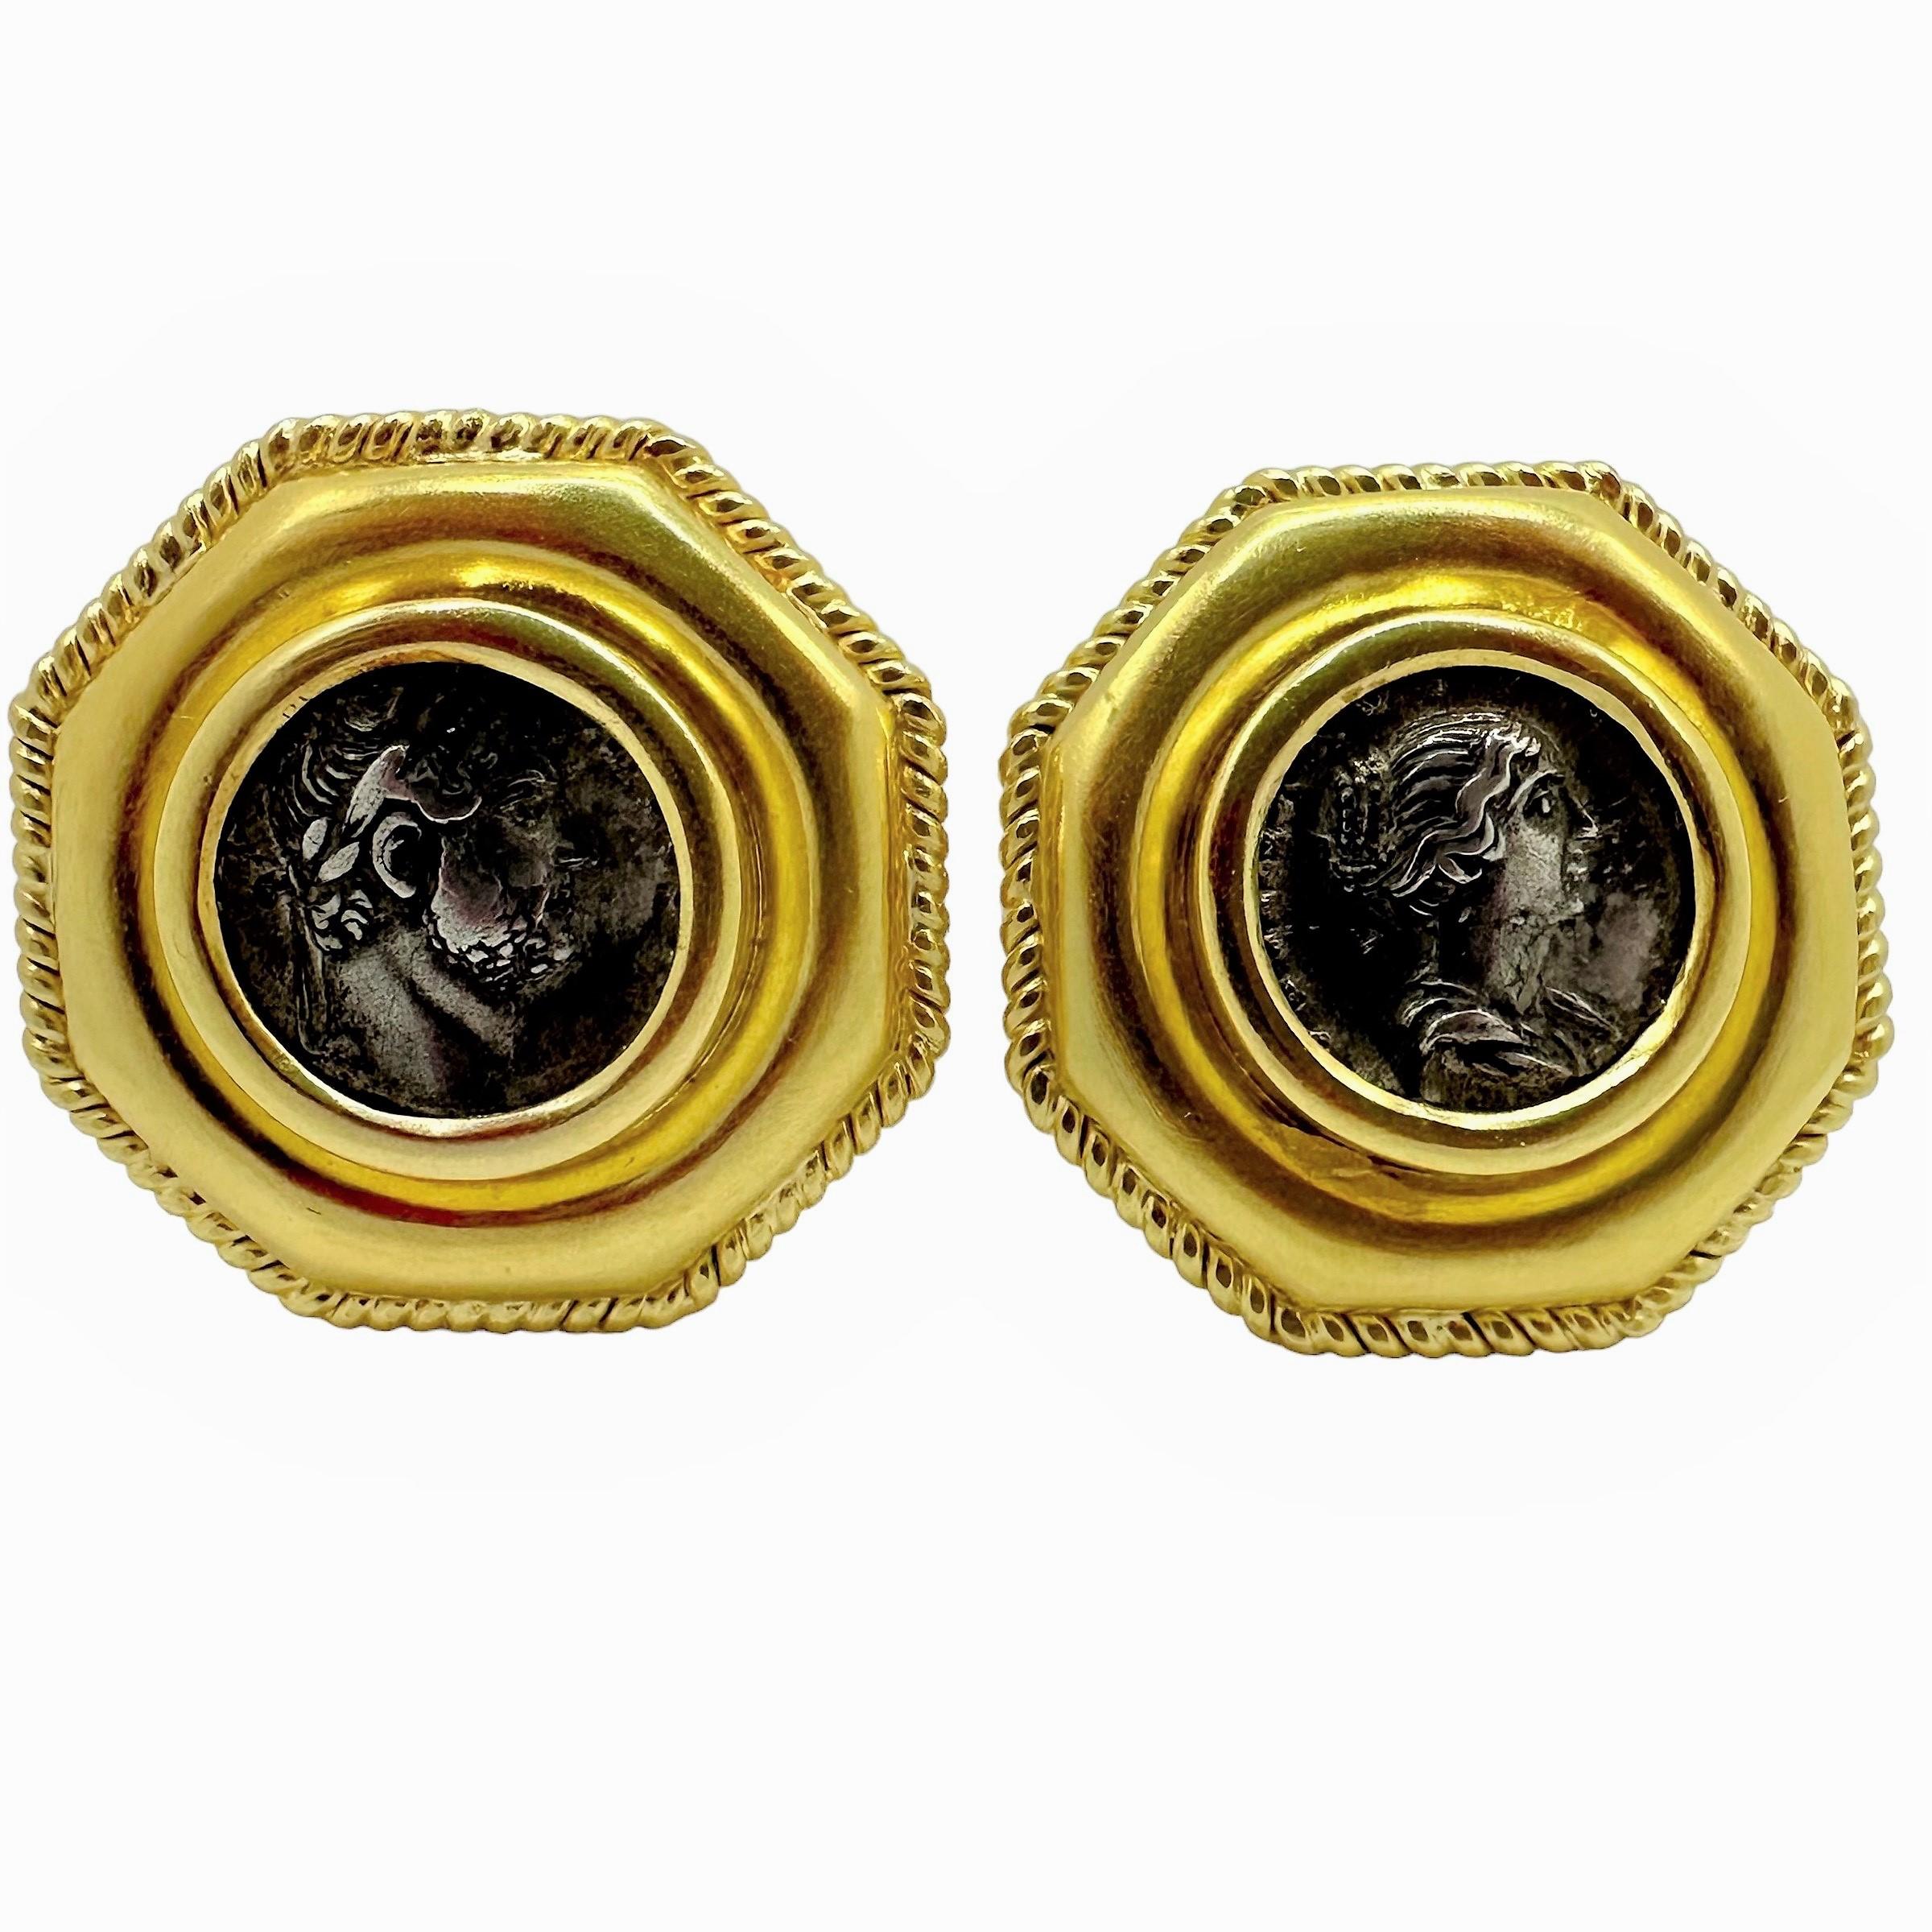 This exquisite pair of Elizabeth Locke designer earrings are set with one ancient silver, Roman Empire period coin in each. Both antiquities are set at the center of  rope edge octagonal 18K yellow gold frames, measuring 1 3/16 inches in diameter. A